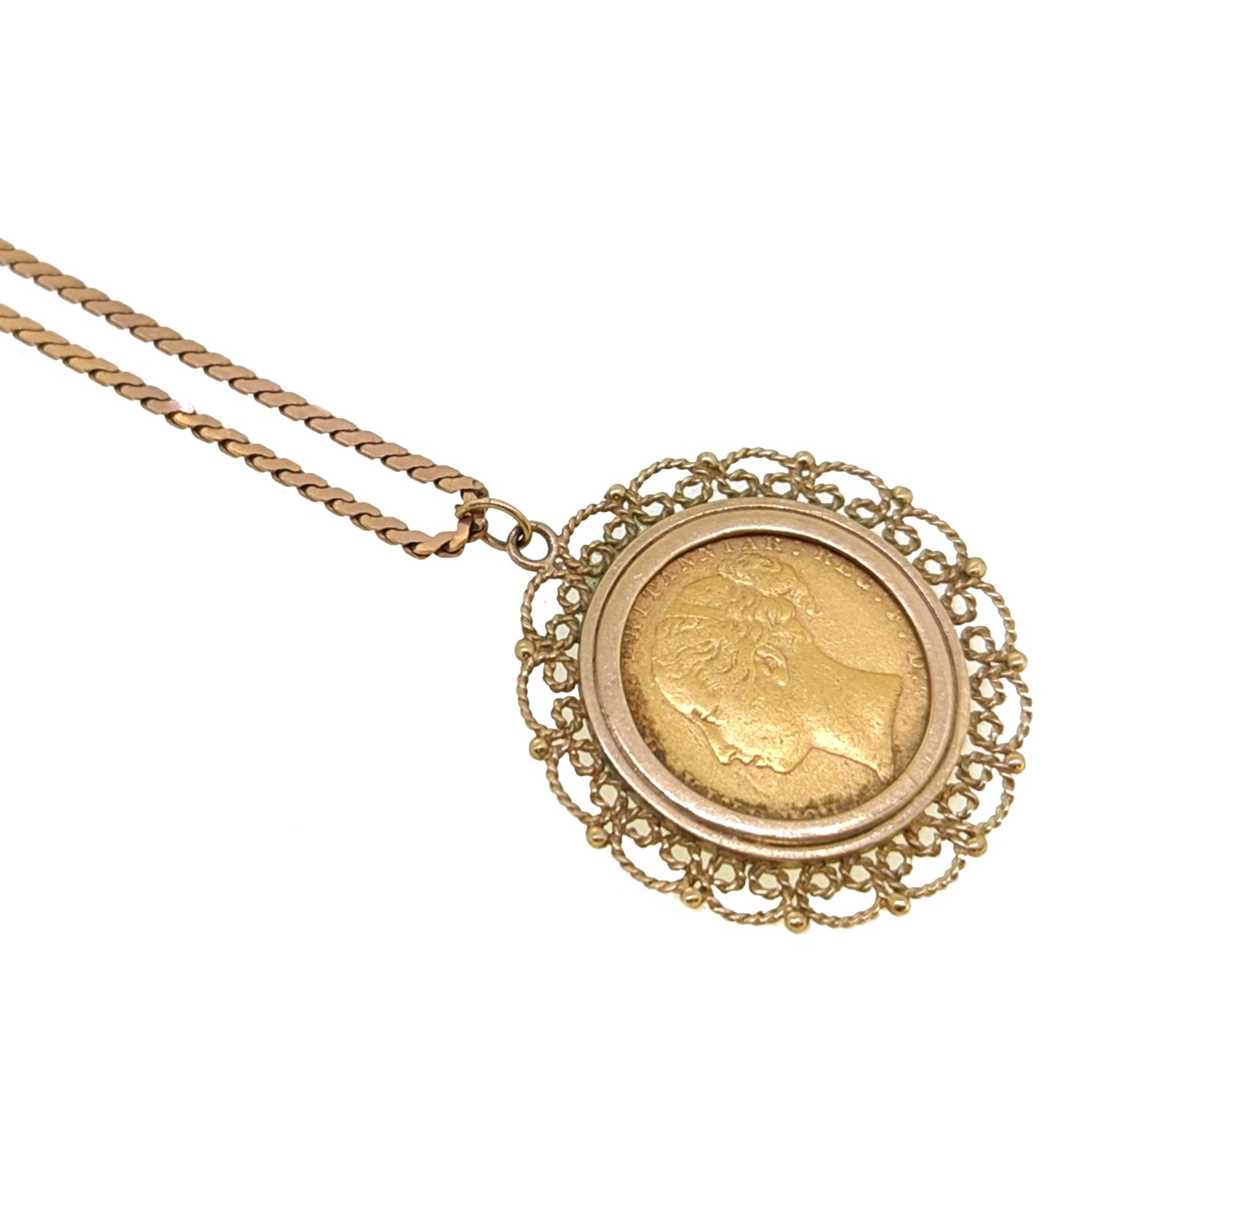 A full sovereign pendant and chain,